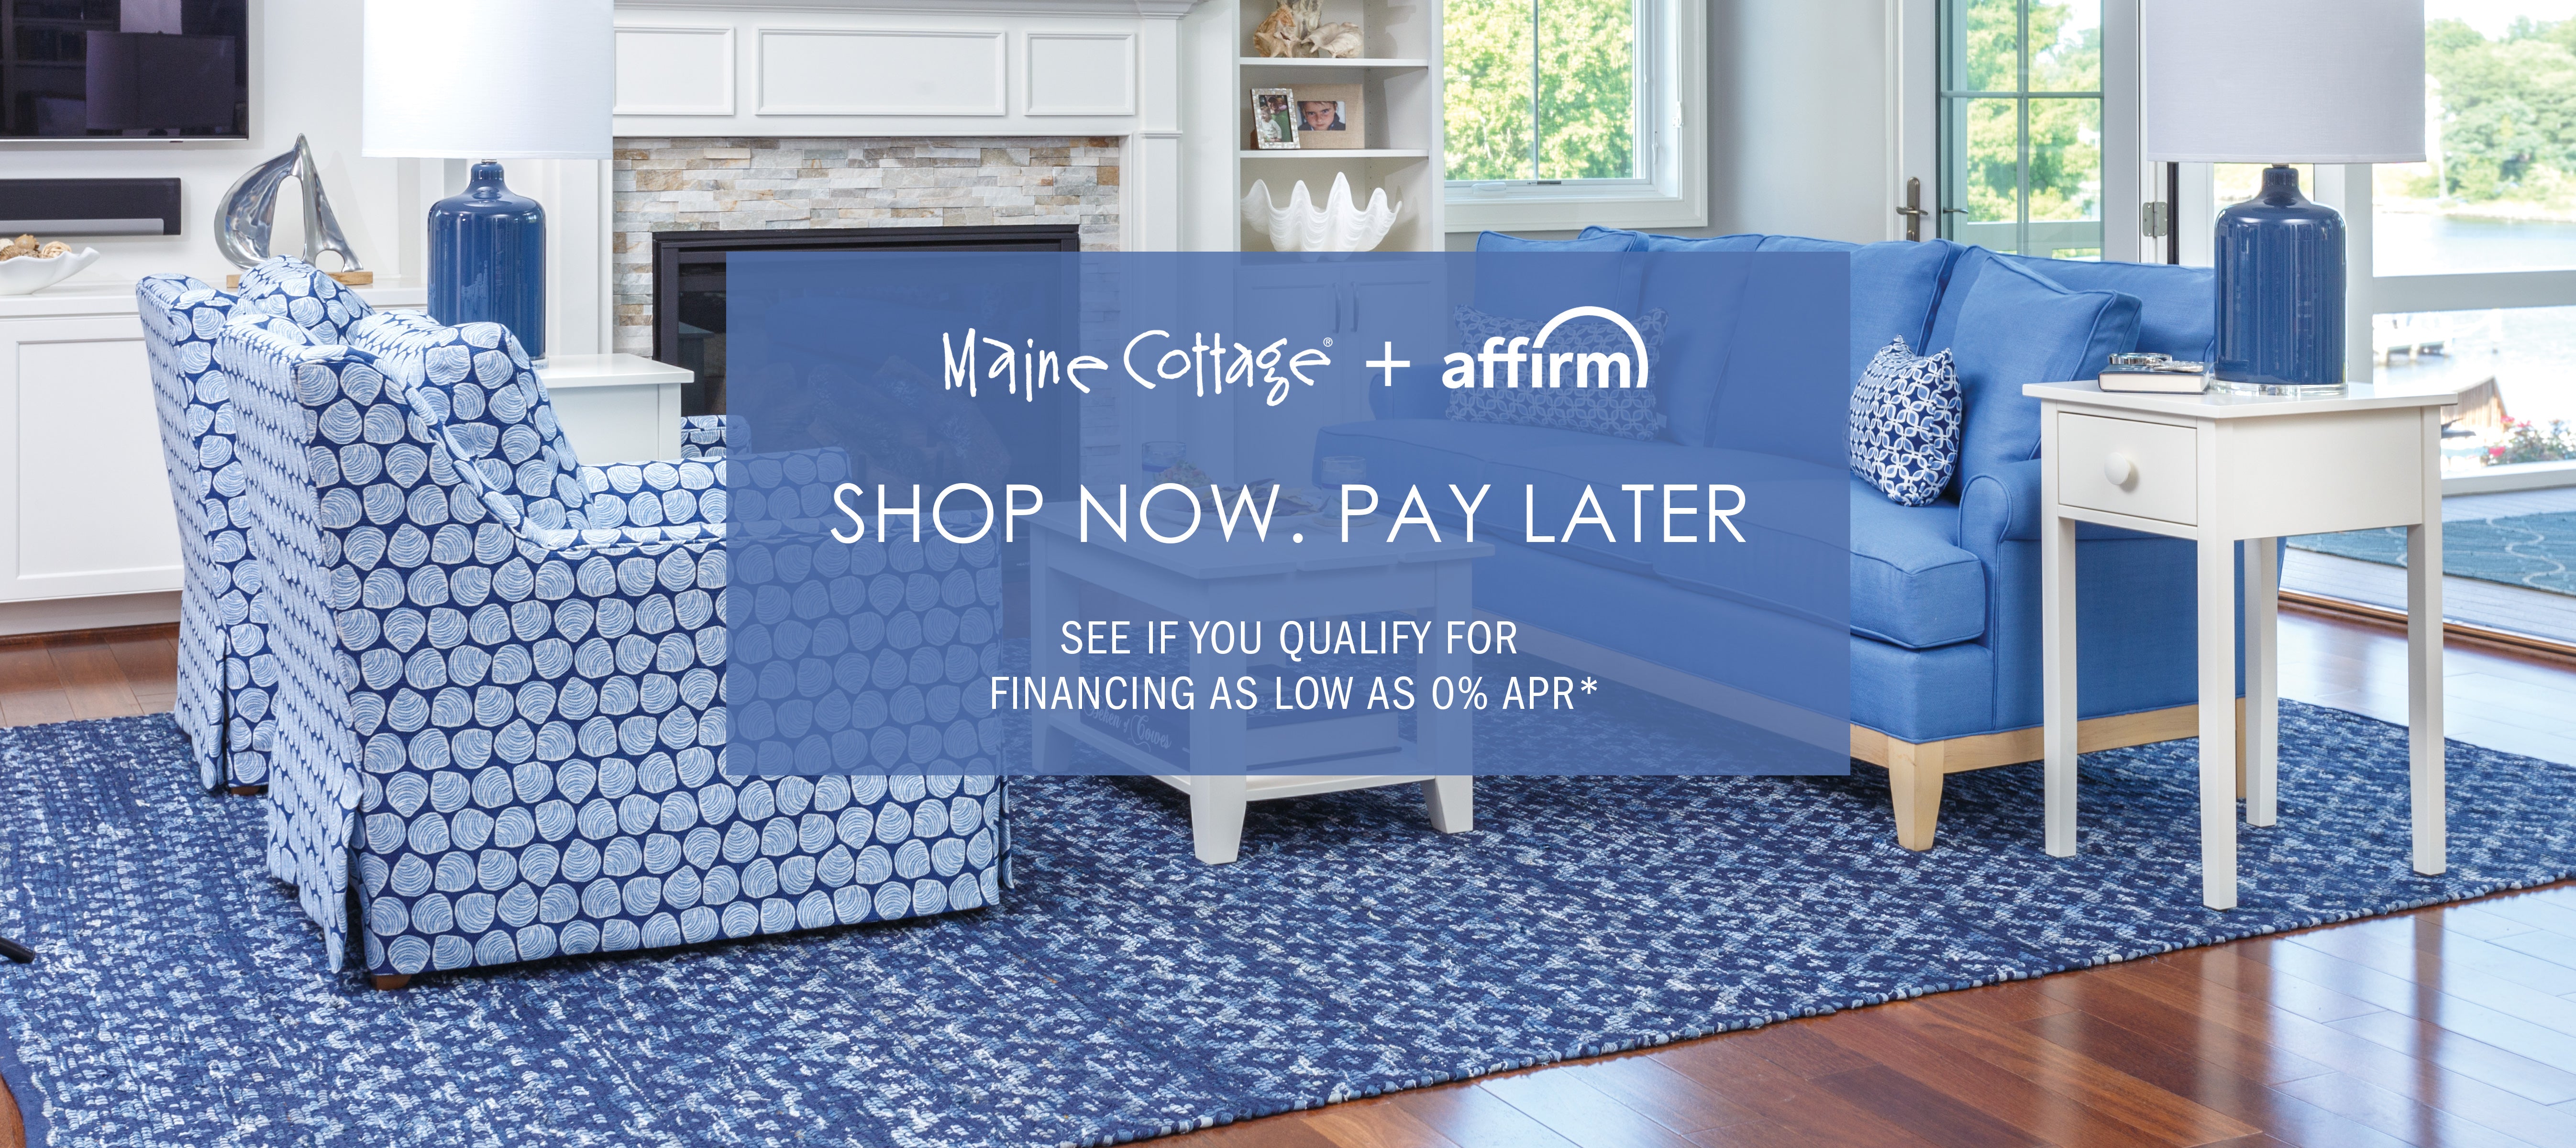 affirm financing available as low as 0% APR